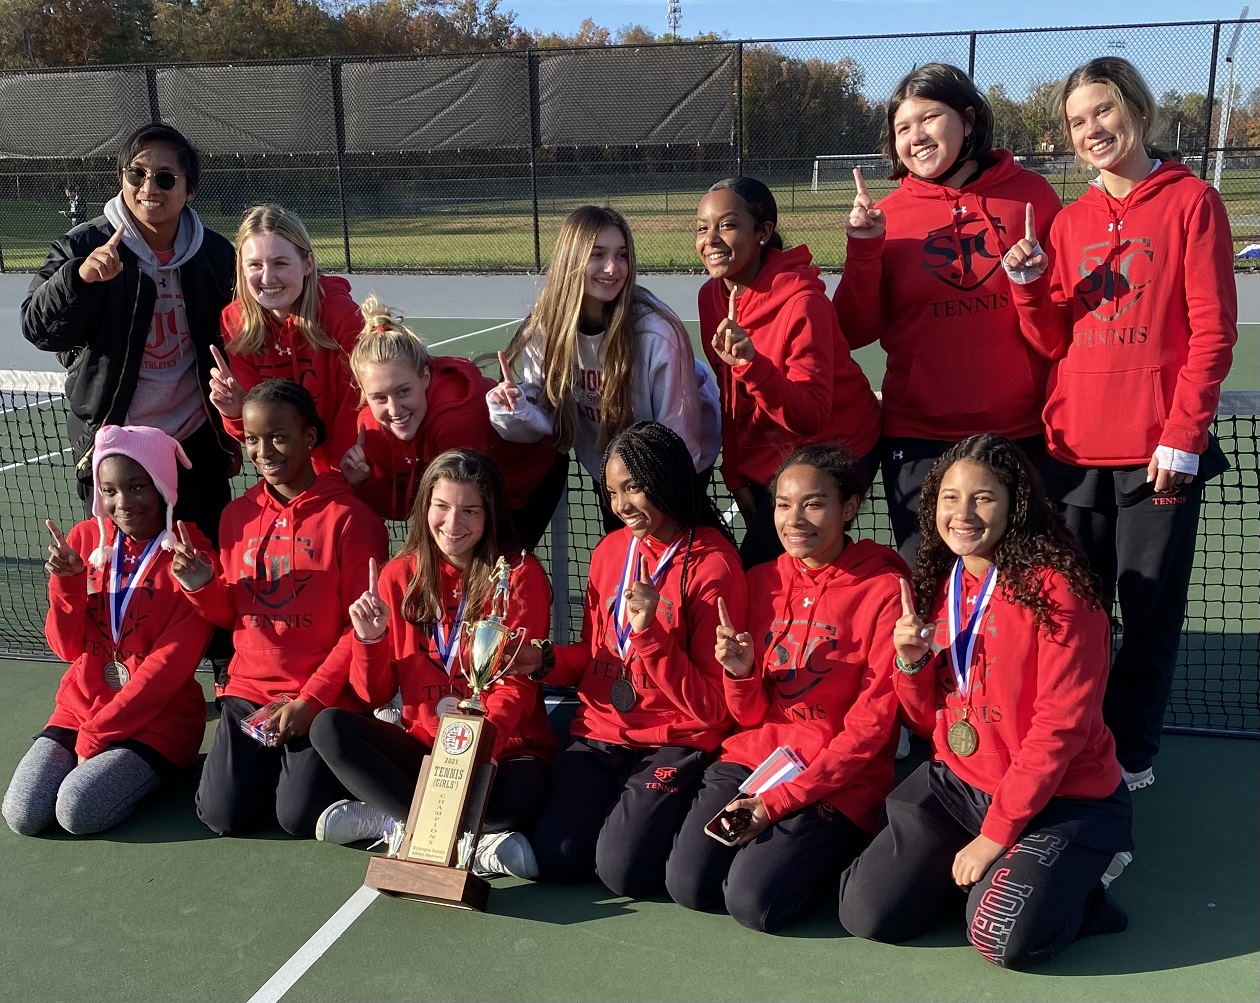 St. John’s girls put it all together and end up with another WCAC tennis title